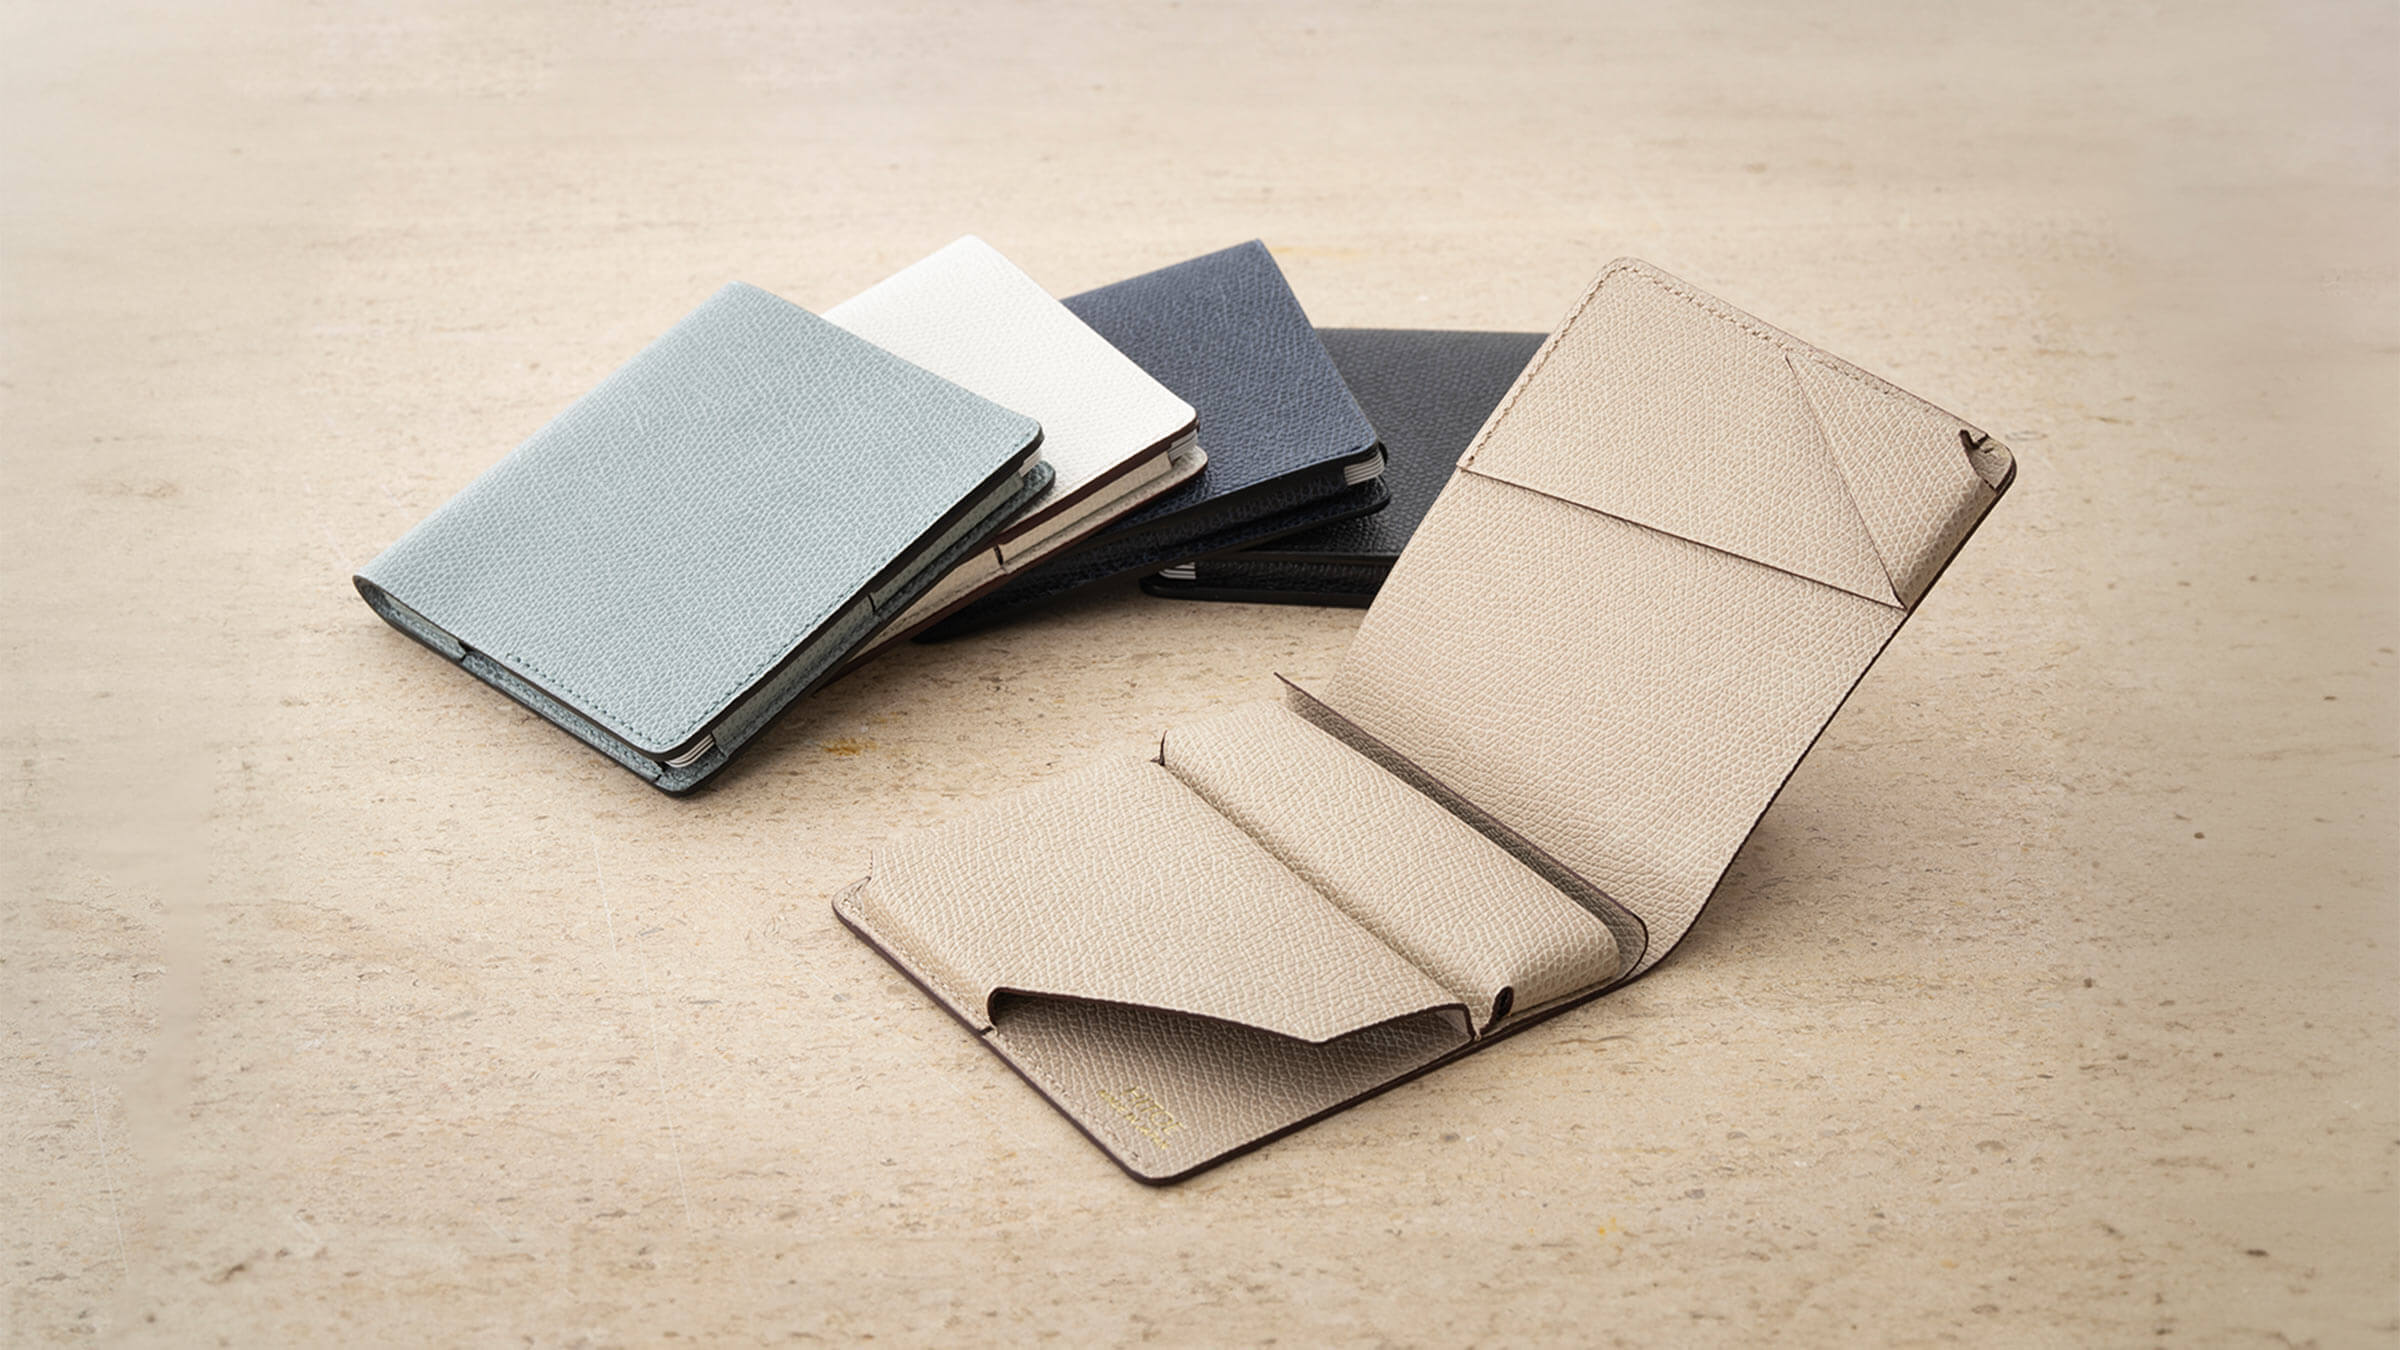 Thin wallets with minimalism at its finest.